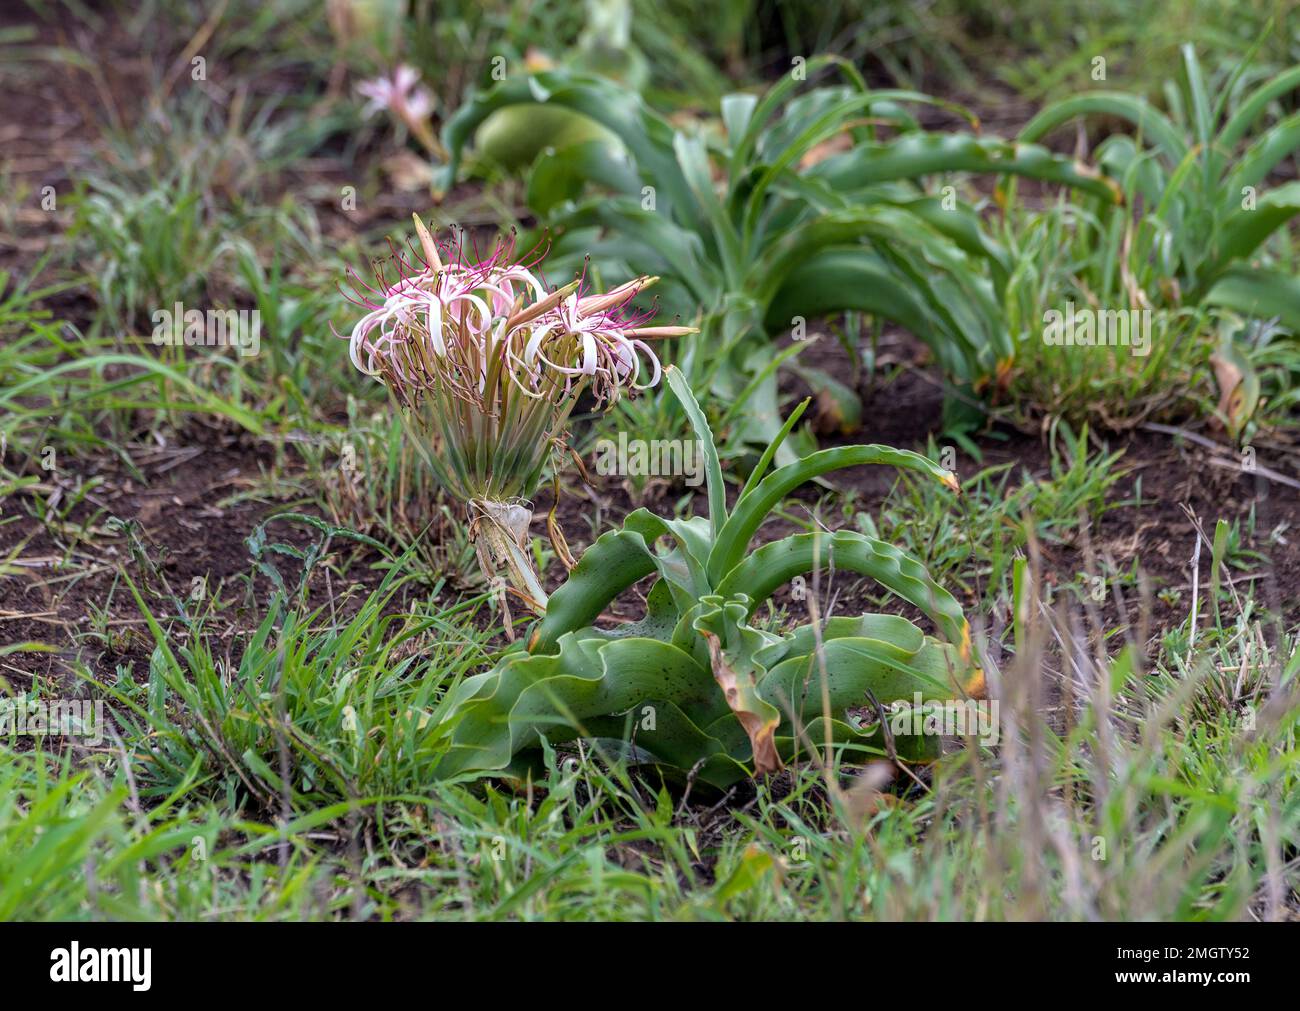 Sand lilly (Crinum buphanoides) from Kruger NP, South Africa. Stock Photo